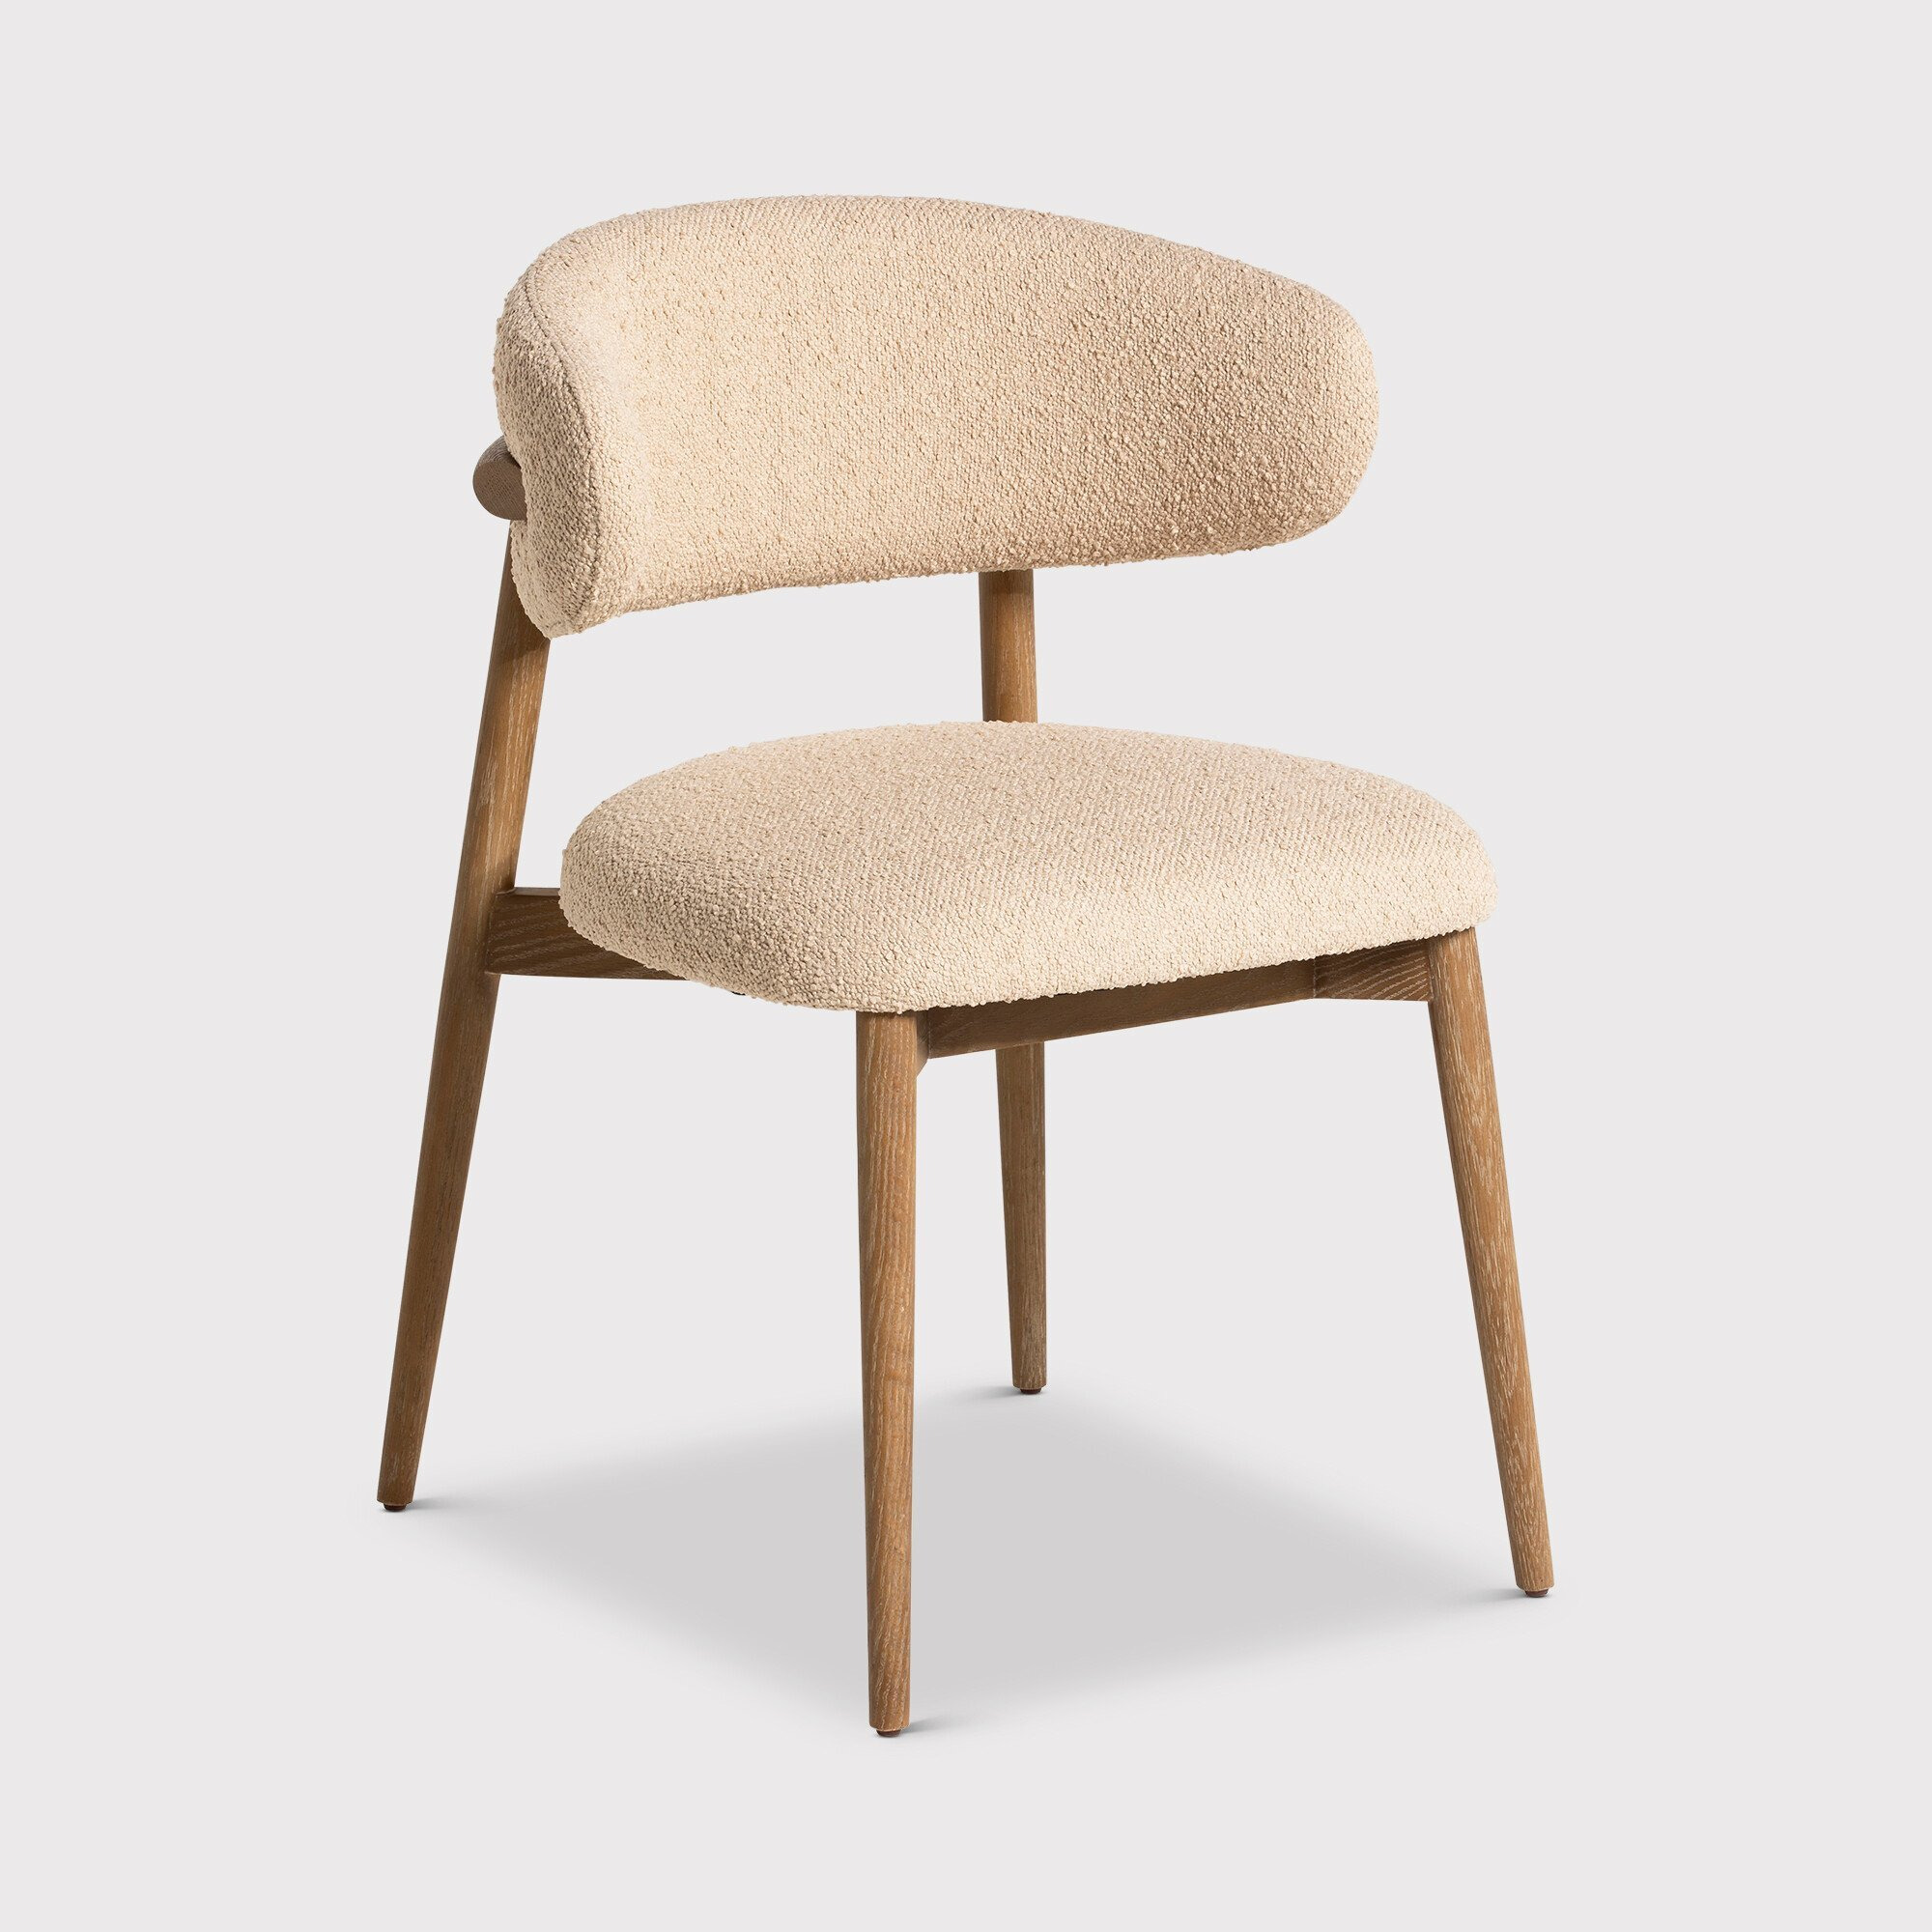 Lexa Dining Chair, Neutral Boucle - Barker & Stonehouse - image 1